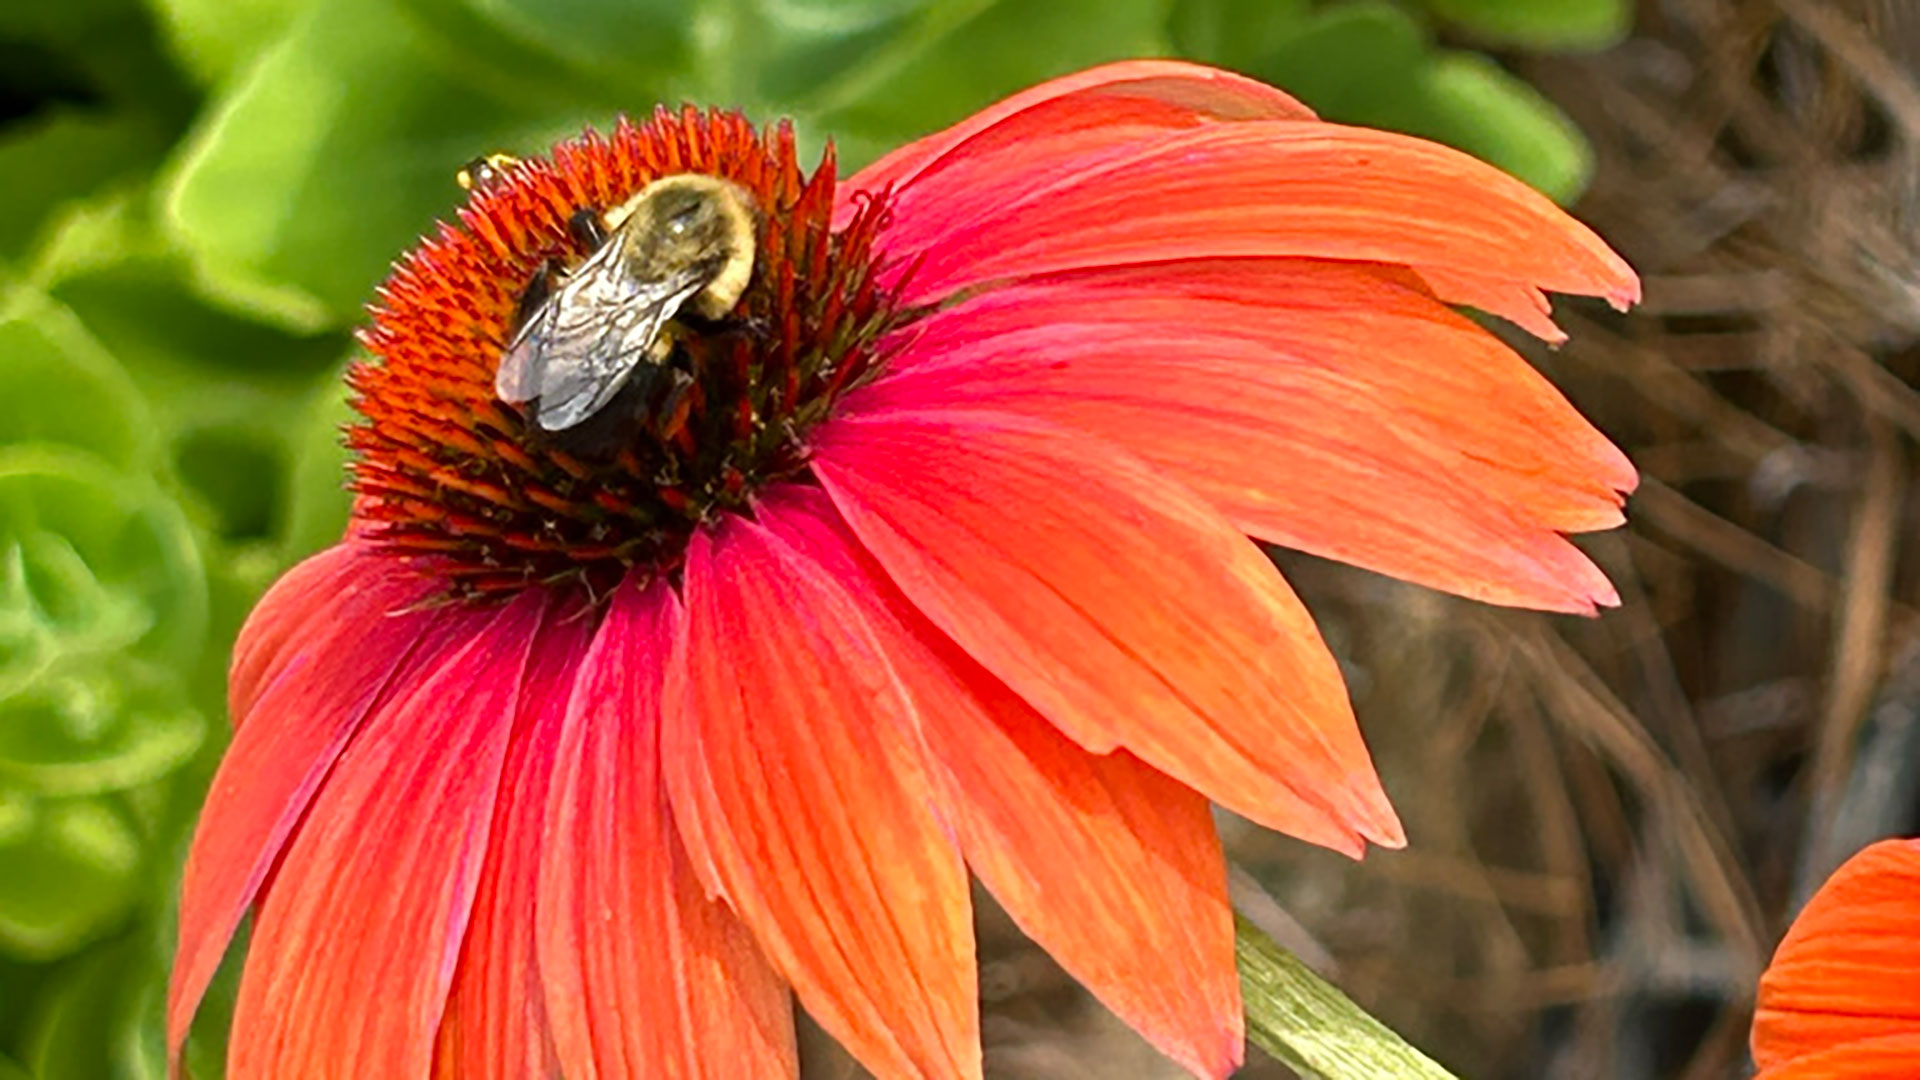 A bee on an orange daisy from the Peachtree Road Cutting Garden in Atlanta.